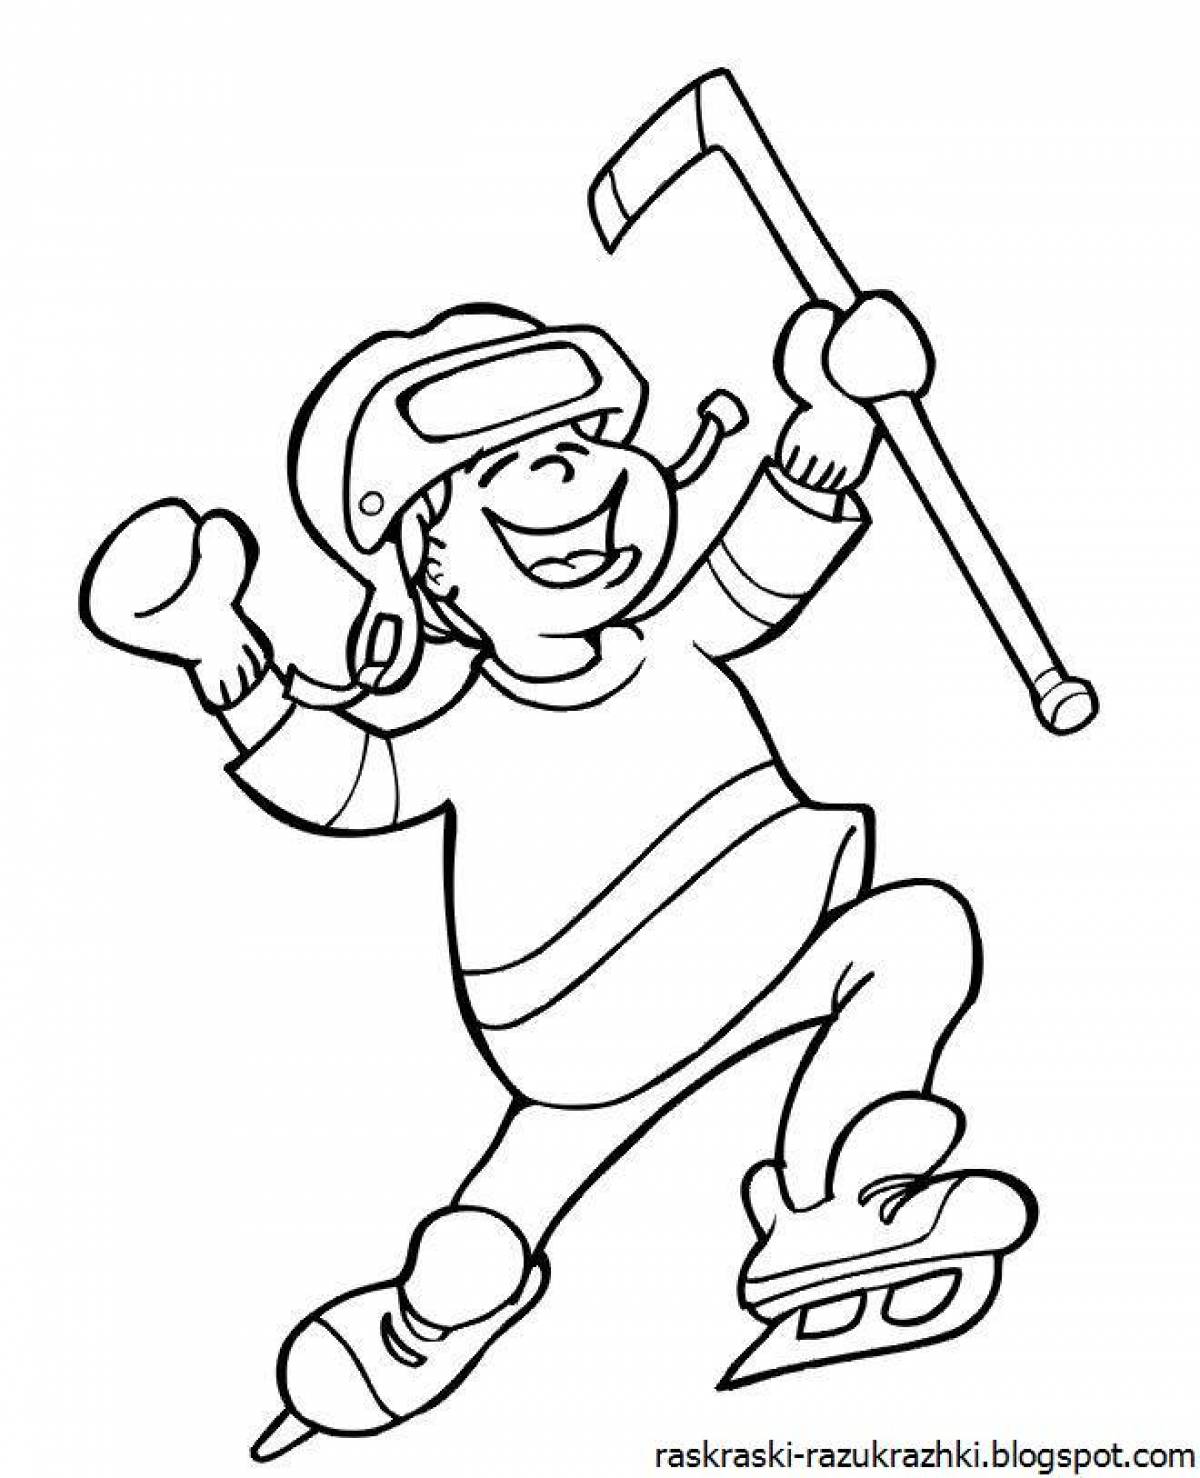 Coloring page joyful hockey player for kids